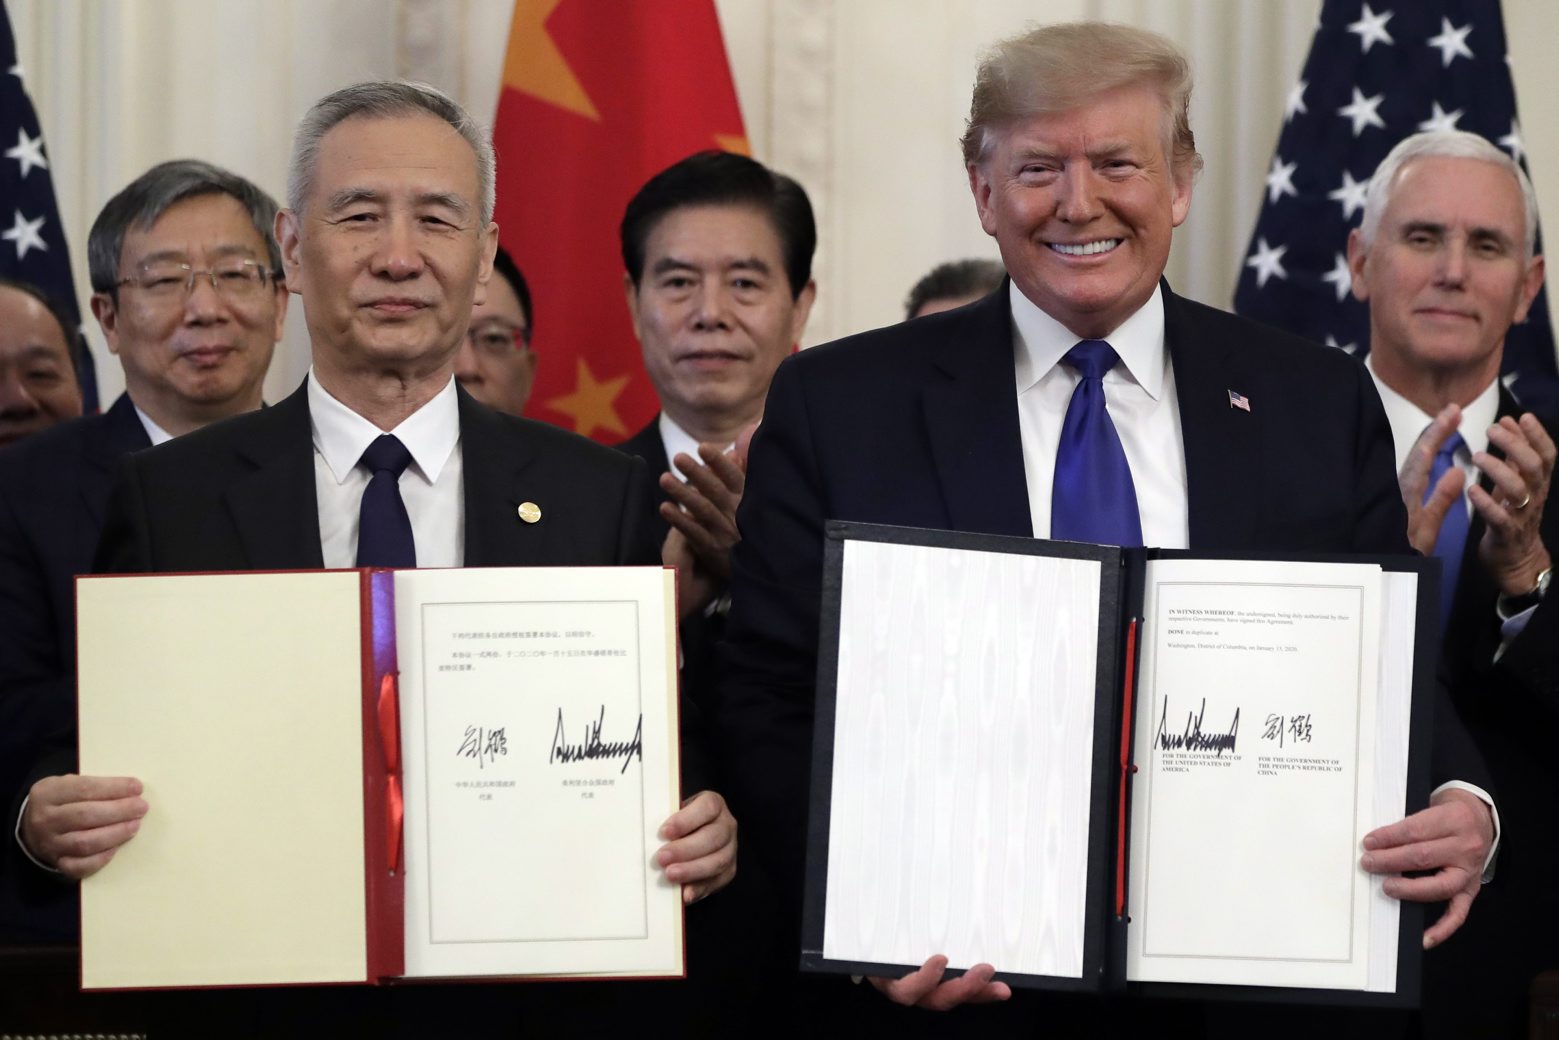 President Donald Trump signs a trade agreement with Chinese Vice Premier Liu He, in the East Room of the White House, Wednesday, Jan. 15, 2020, in Washington. (AP Photo/Evan Vucci)
Donald Trump.Liu He Trump US China Trade